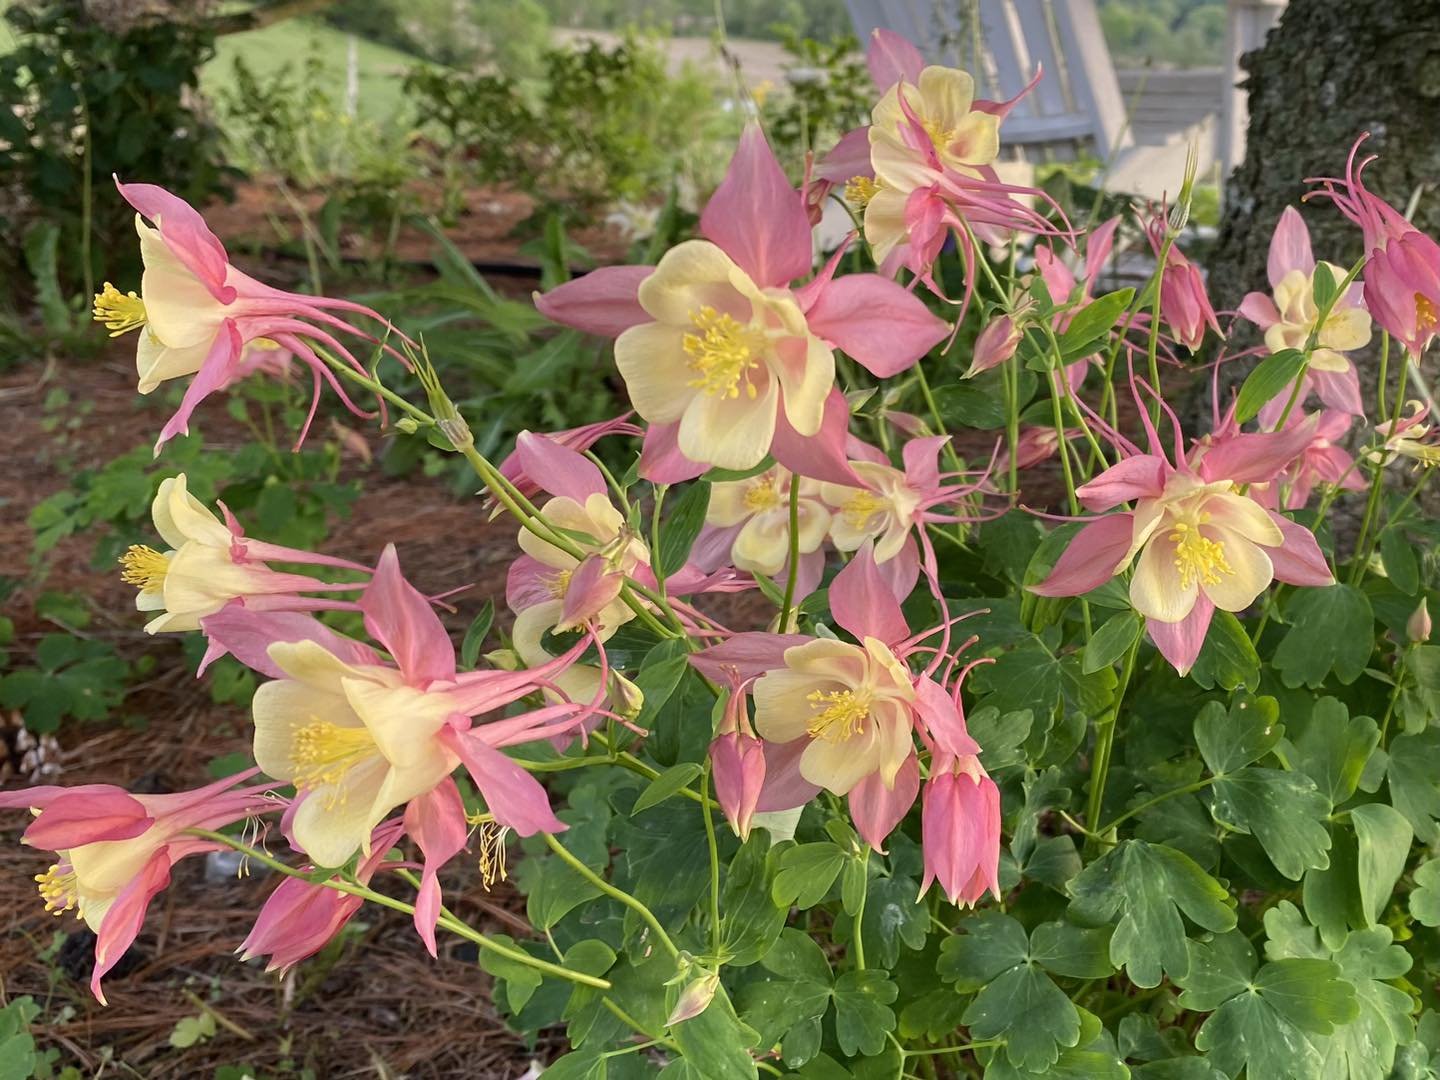 The Columbine is beautiful this year!